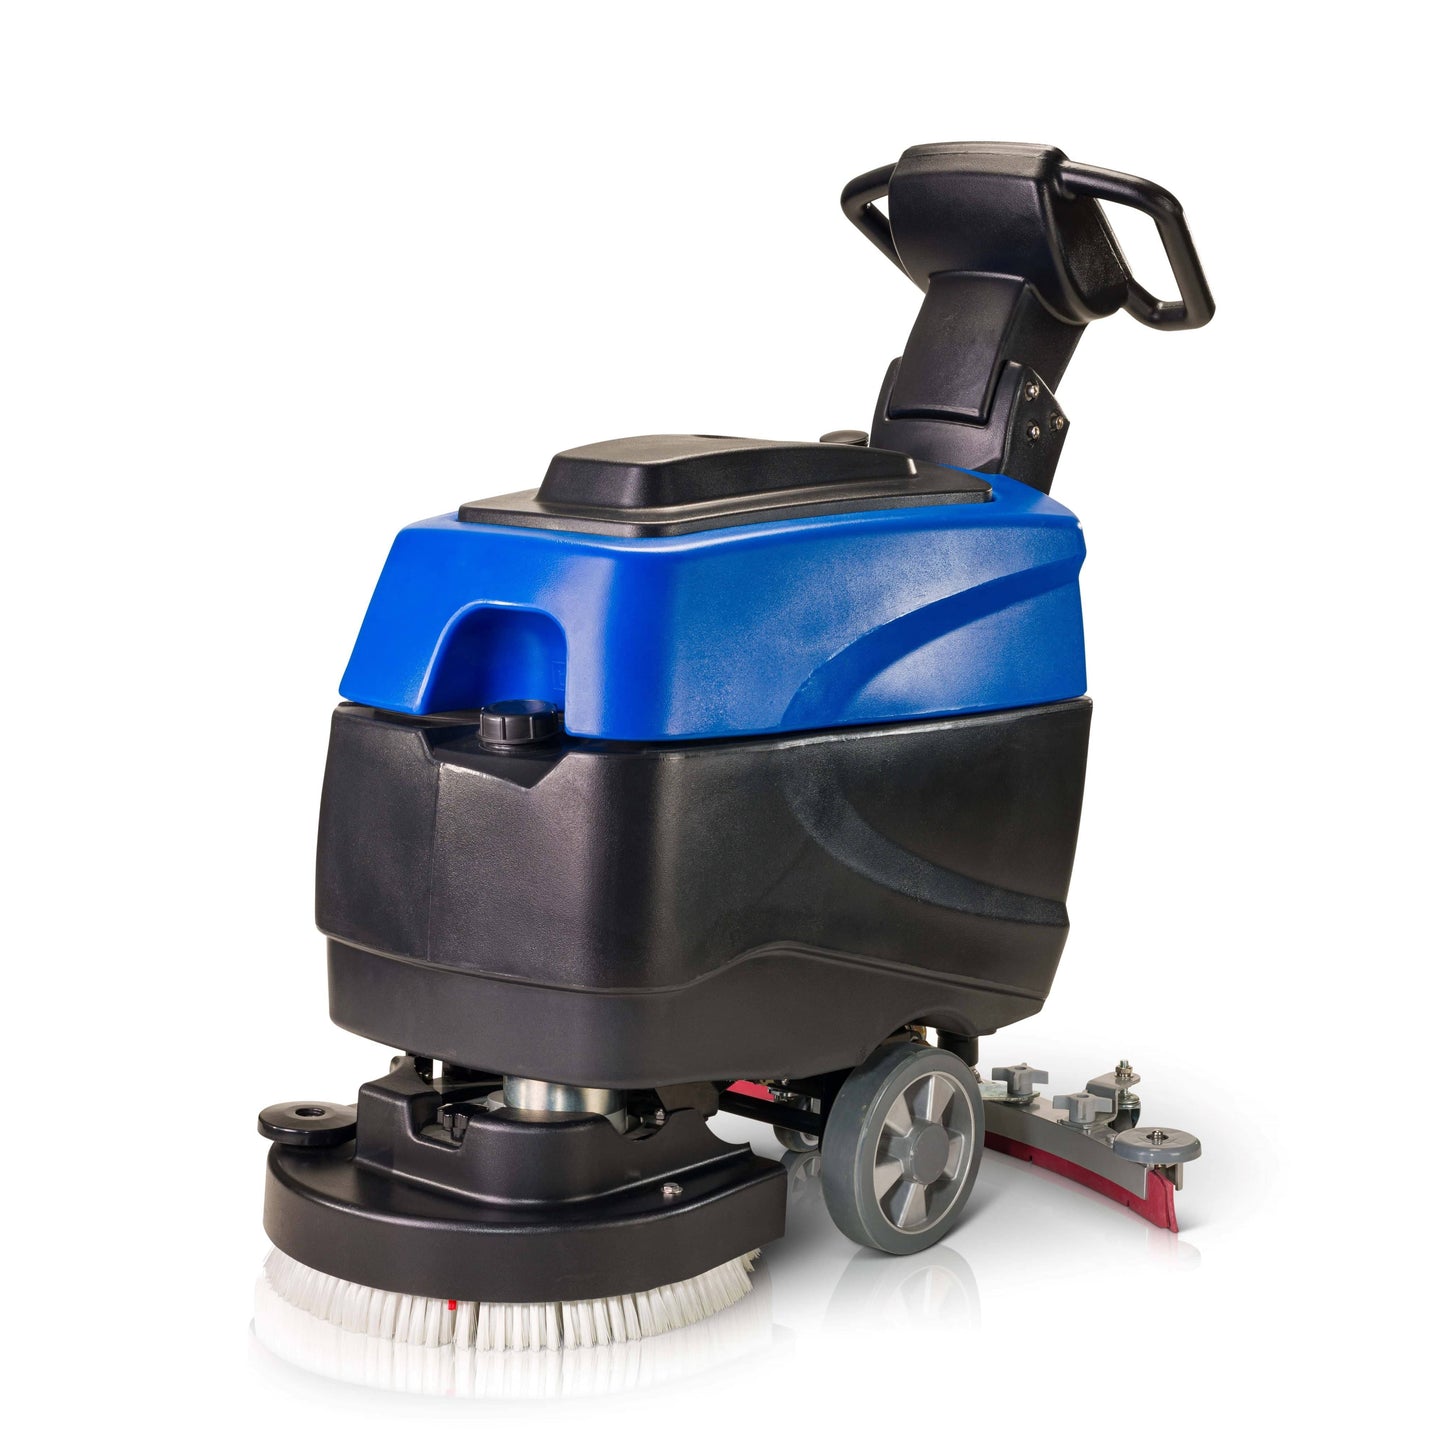 Prolux C460S 18" Cordless Commercial Walk Behind Floor Cleaner, Scrubber & Buffer